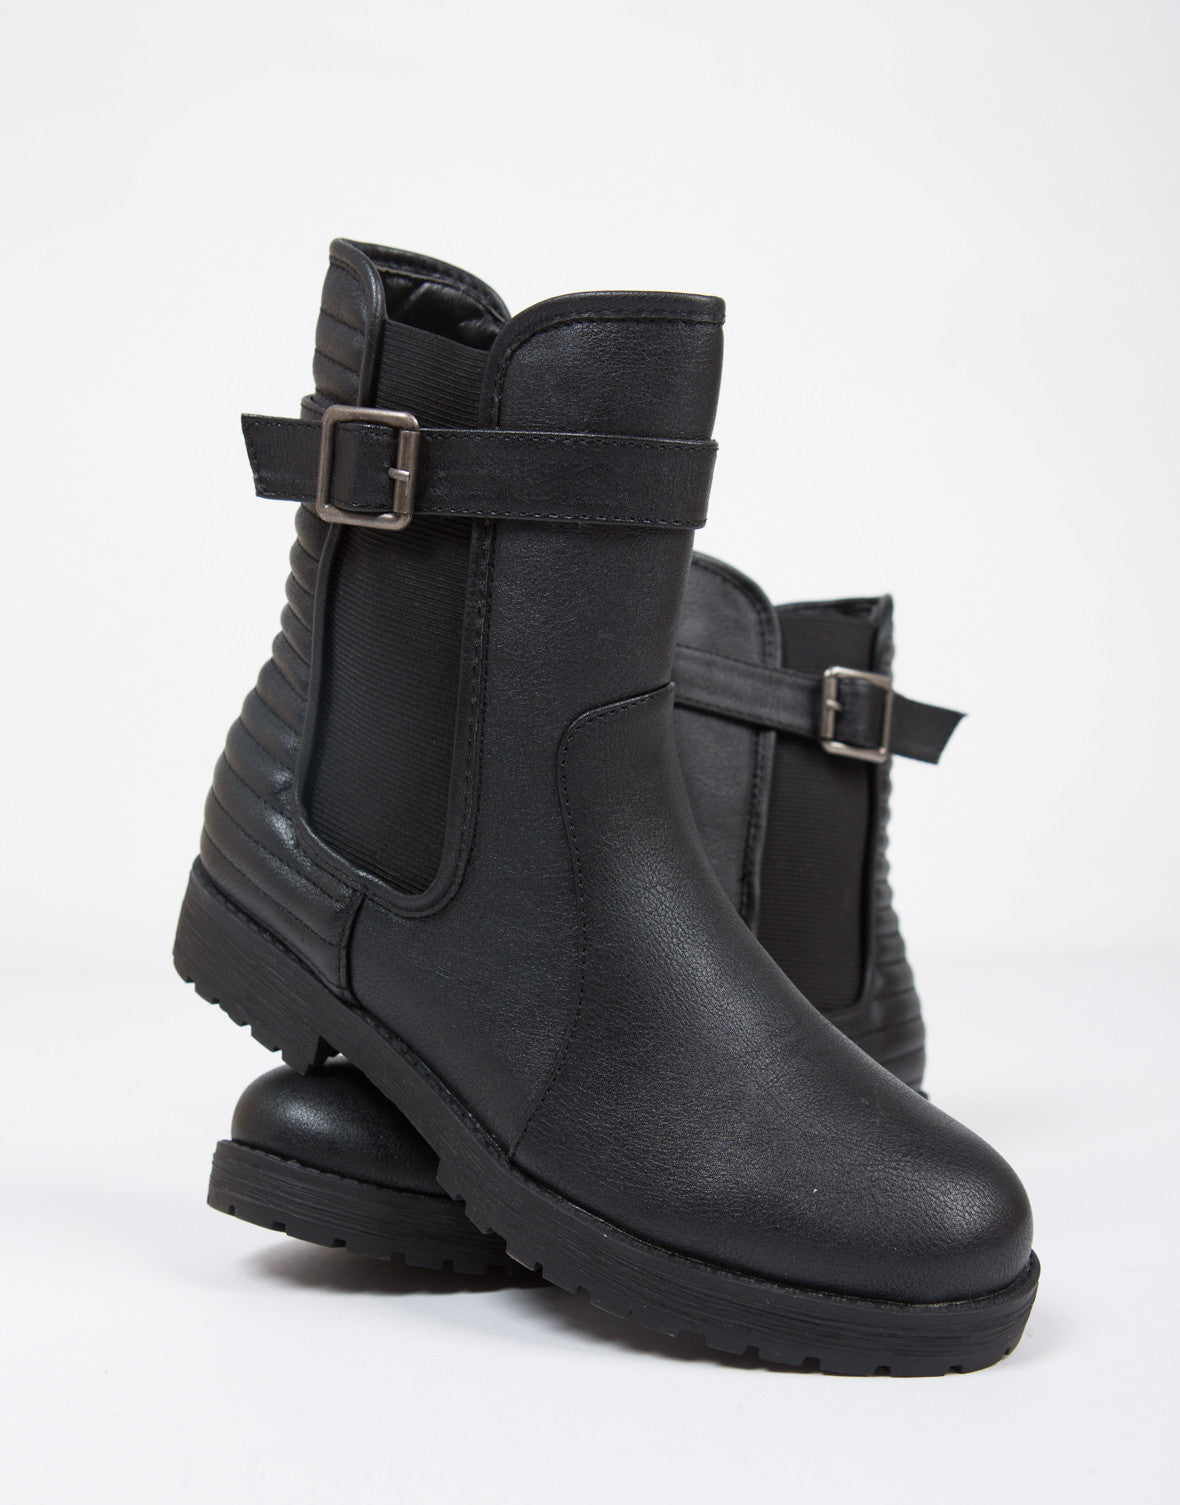 Moto Ridged Ankle Boots - Black Boots - Leather Boots – 2020AVE